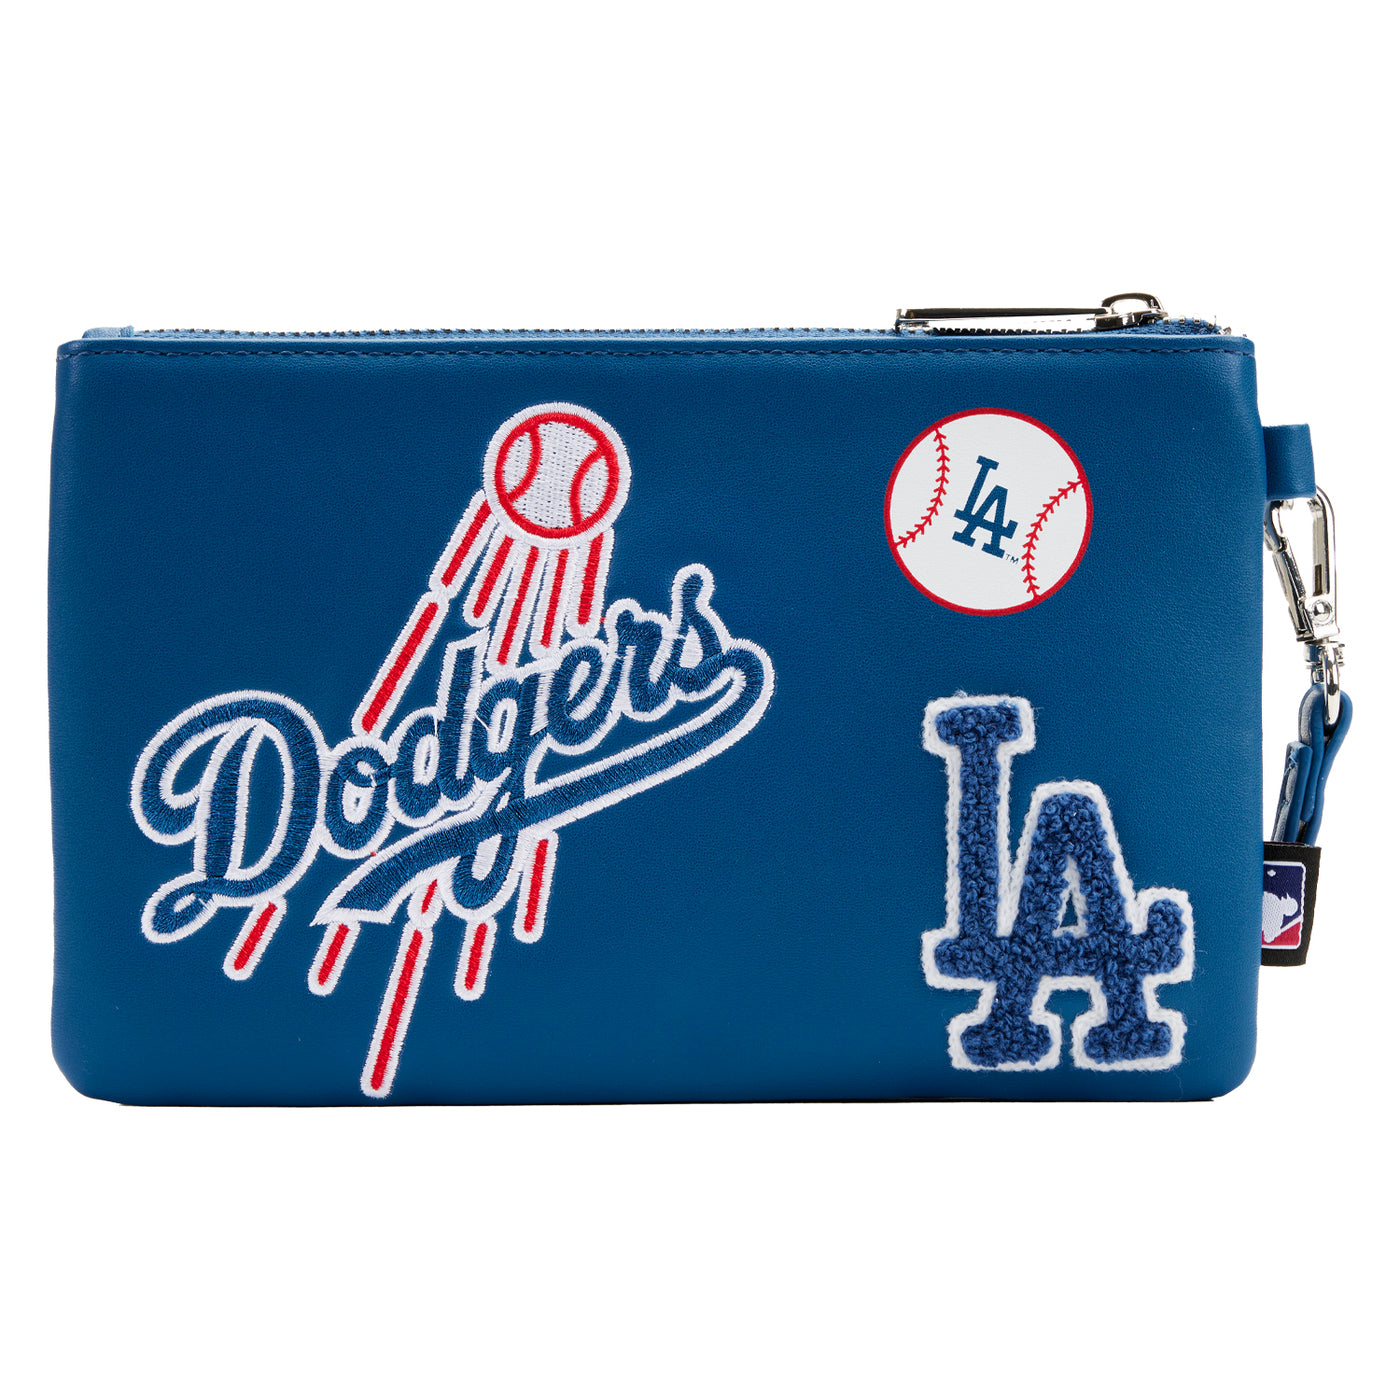 LA Dodgers Security Approved Crossbody Bag, 07/02/2022 Stadium Giveaway, New